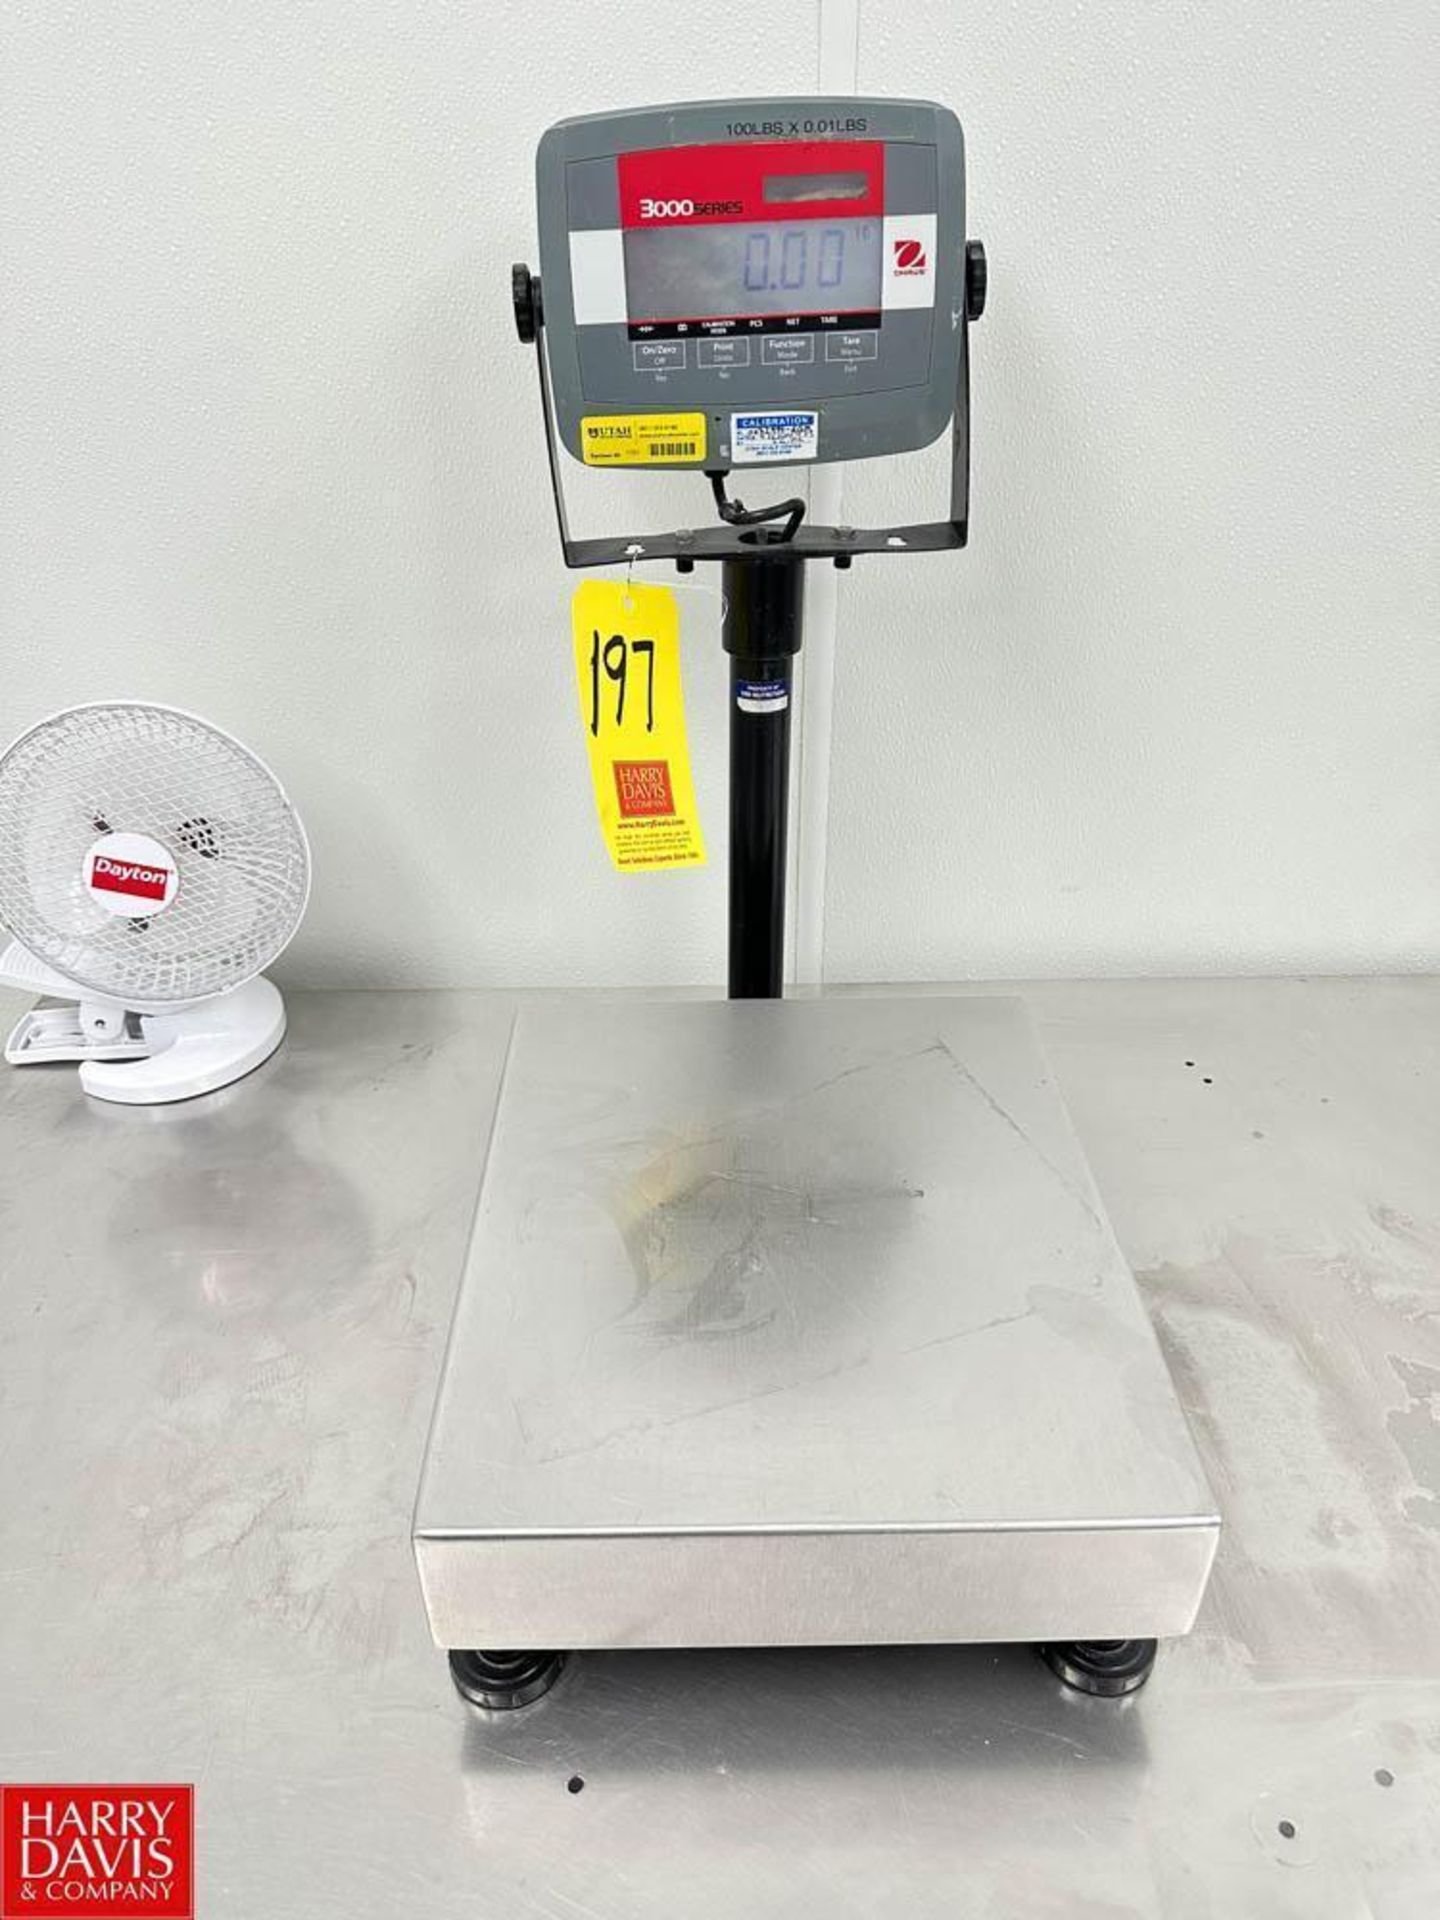 OHAUS 3000 Series Digital Scale - Rigging Fee: $35